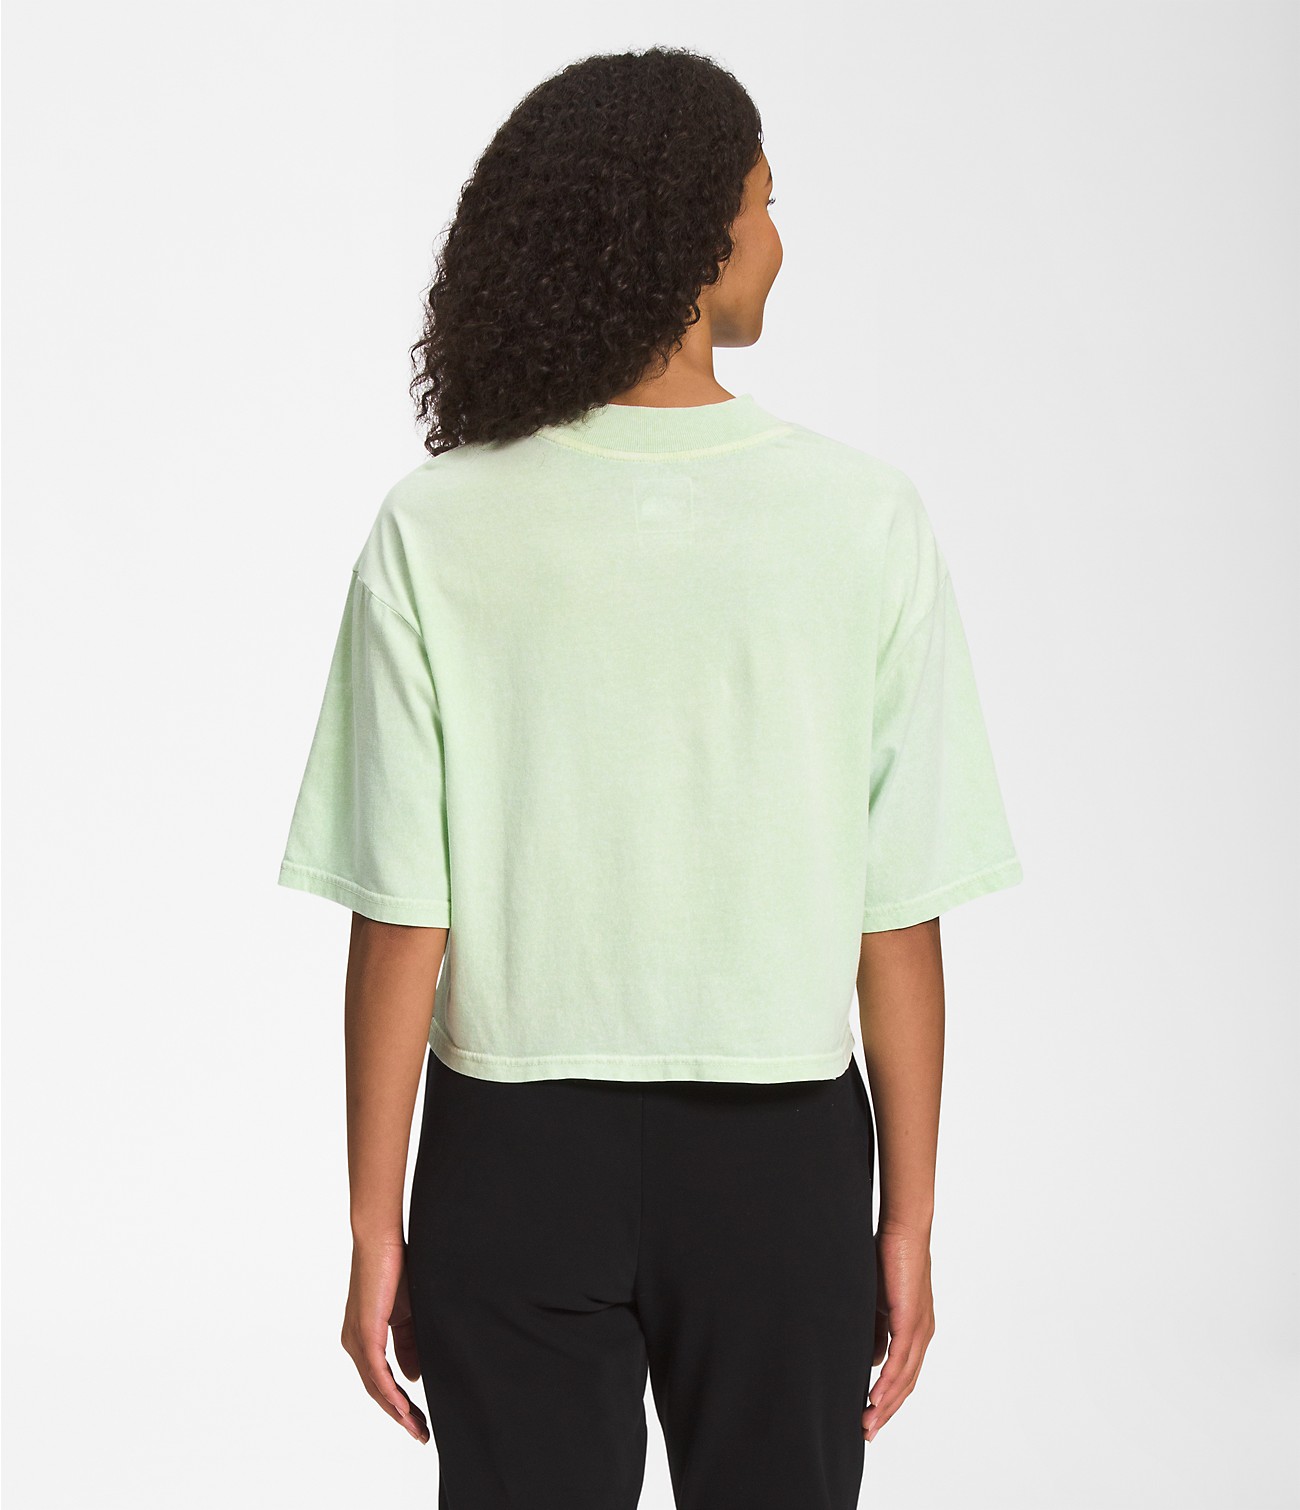 Women’s Short-Sleeve Dye Box Fit Tee | The North Face